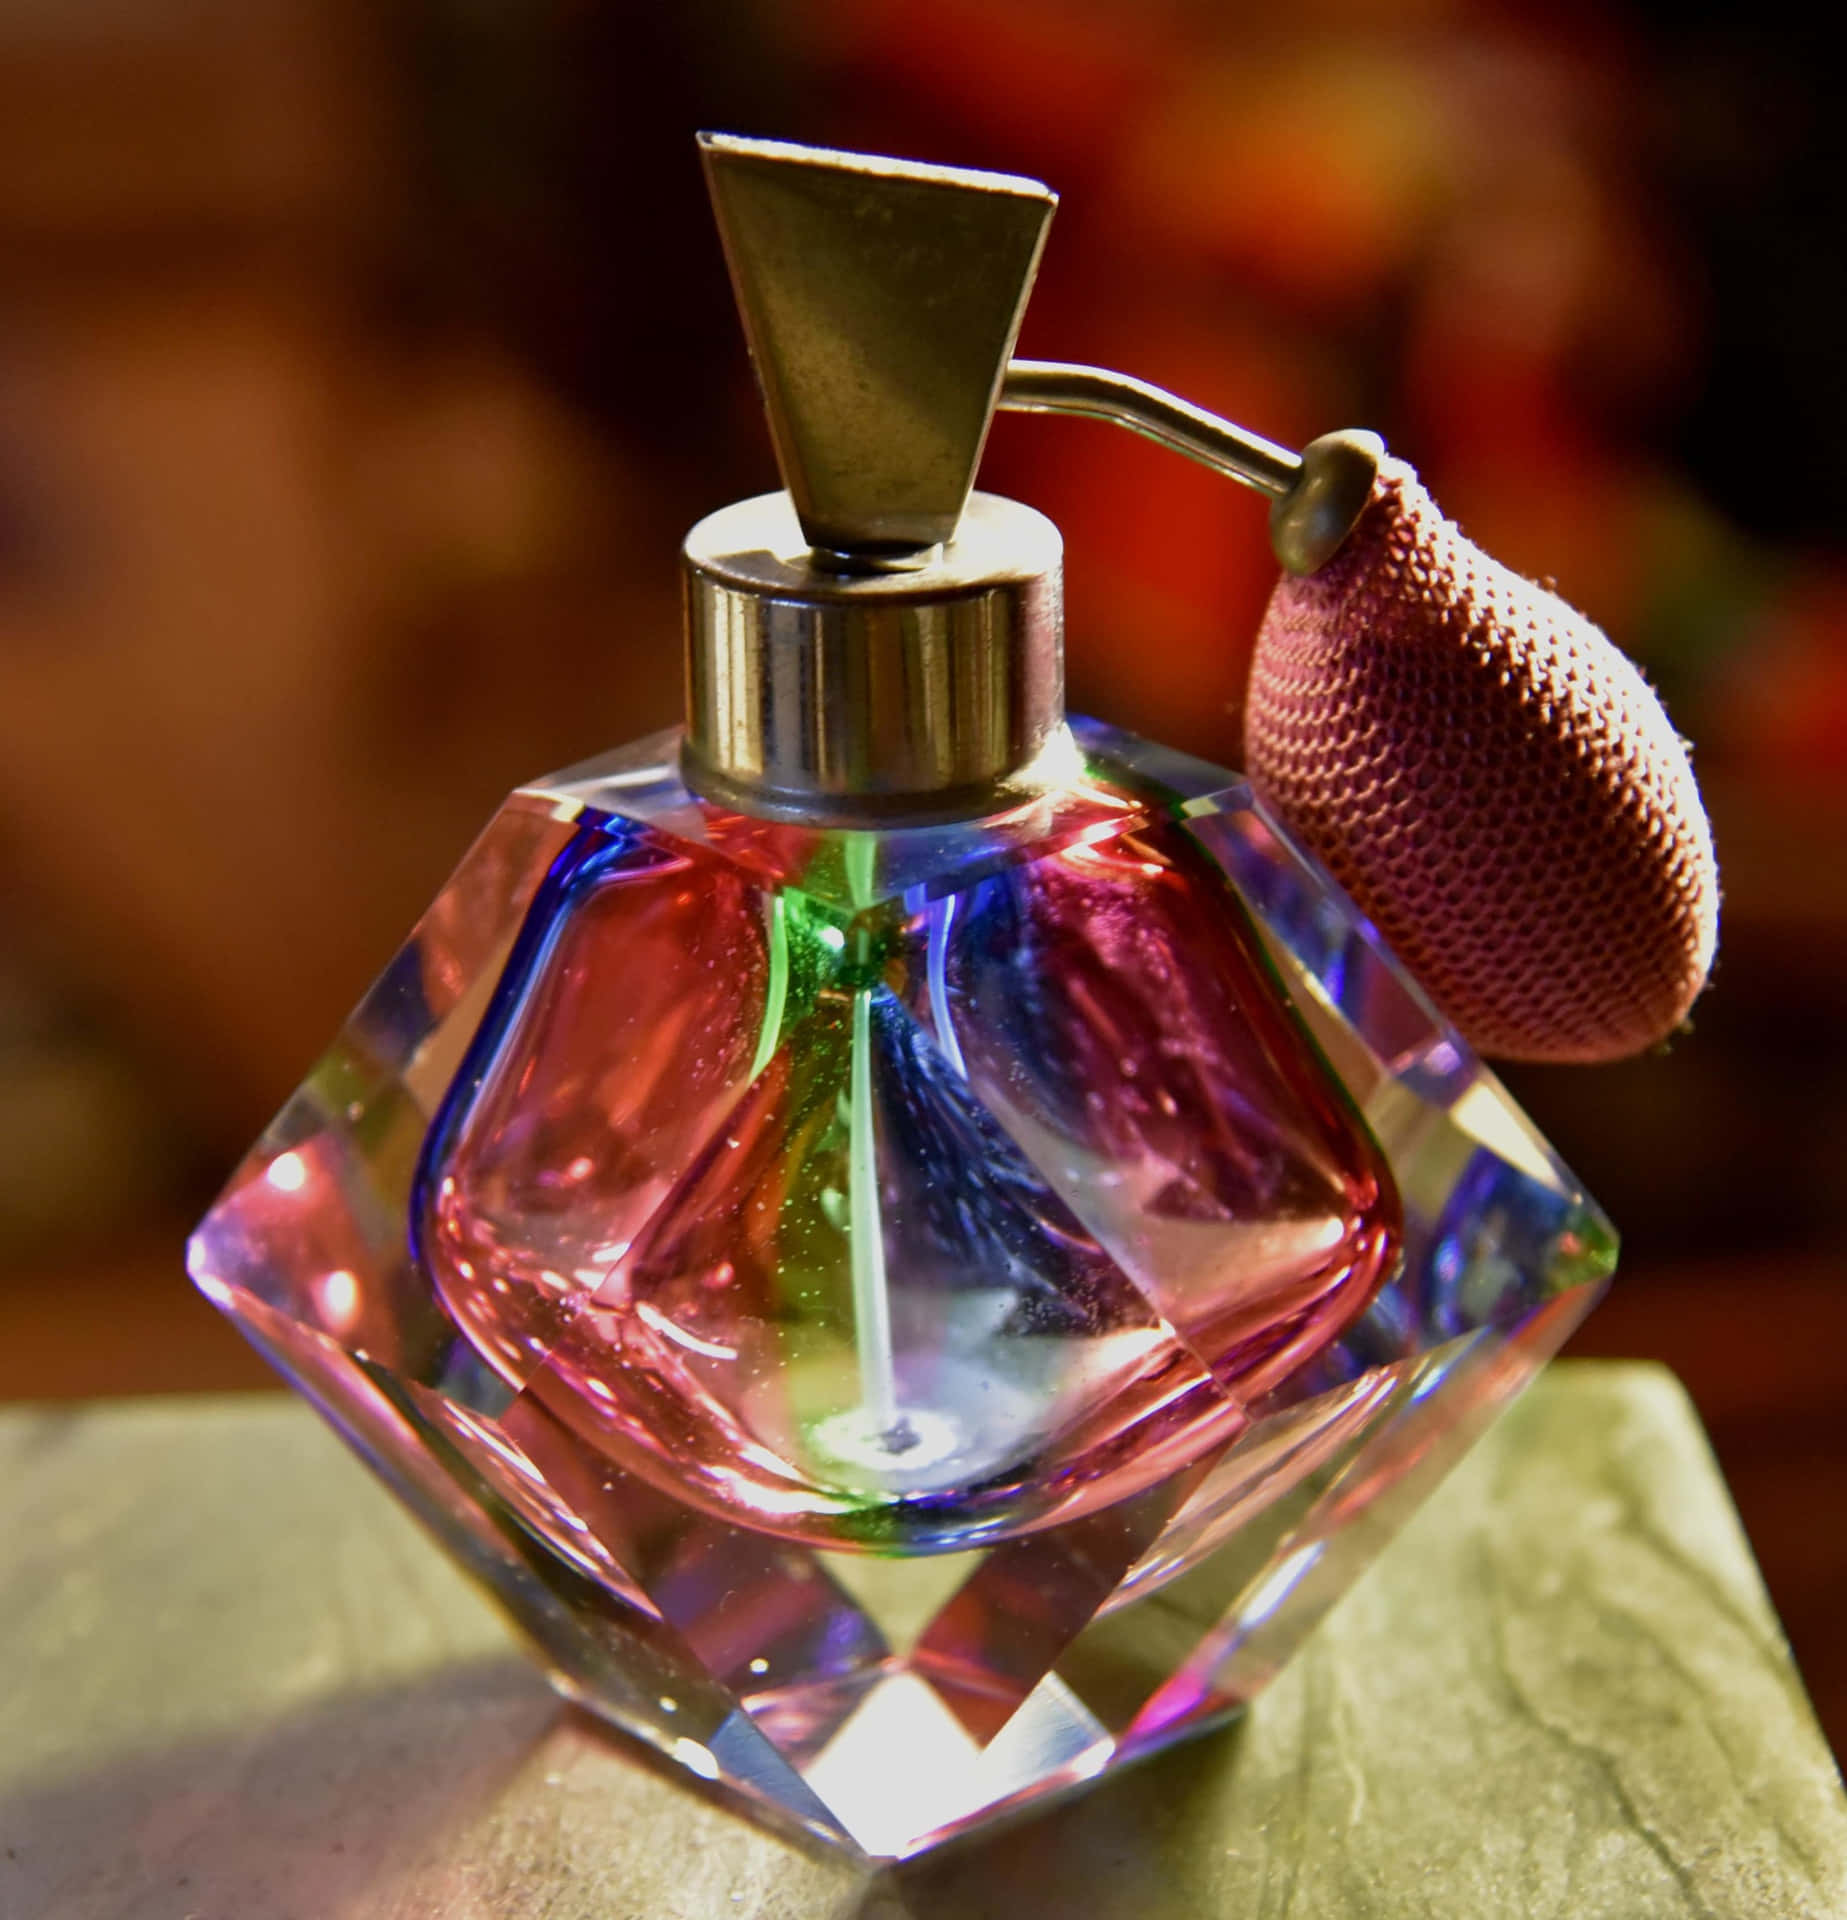 A Small Bottle Of Perfume With A Pink And Purple Lid